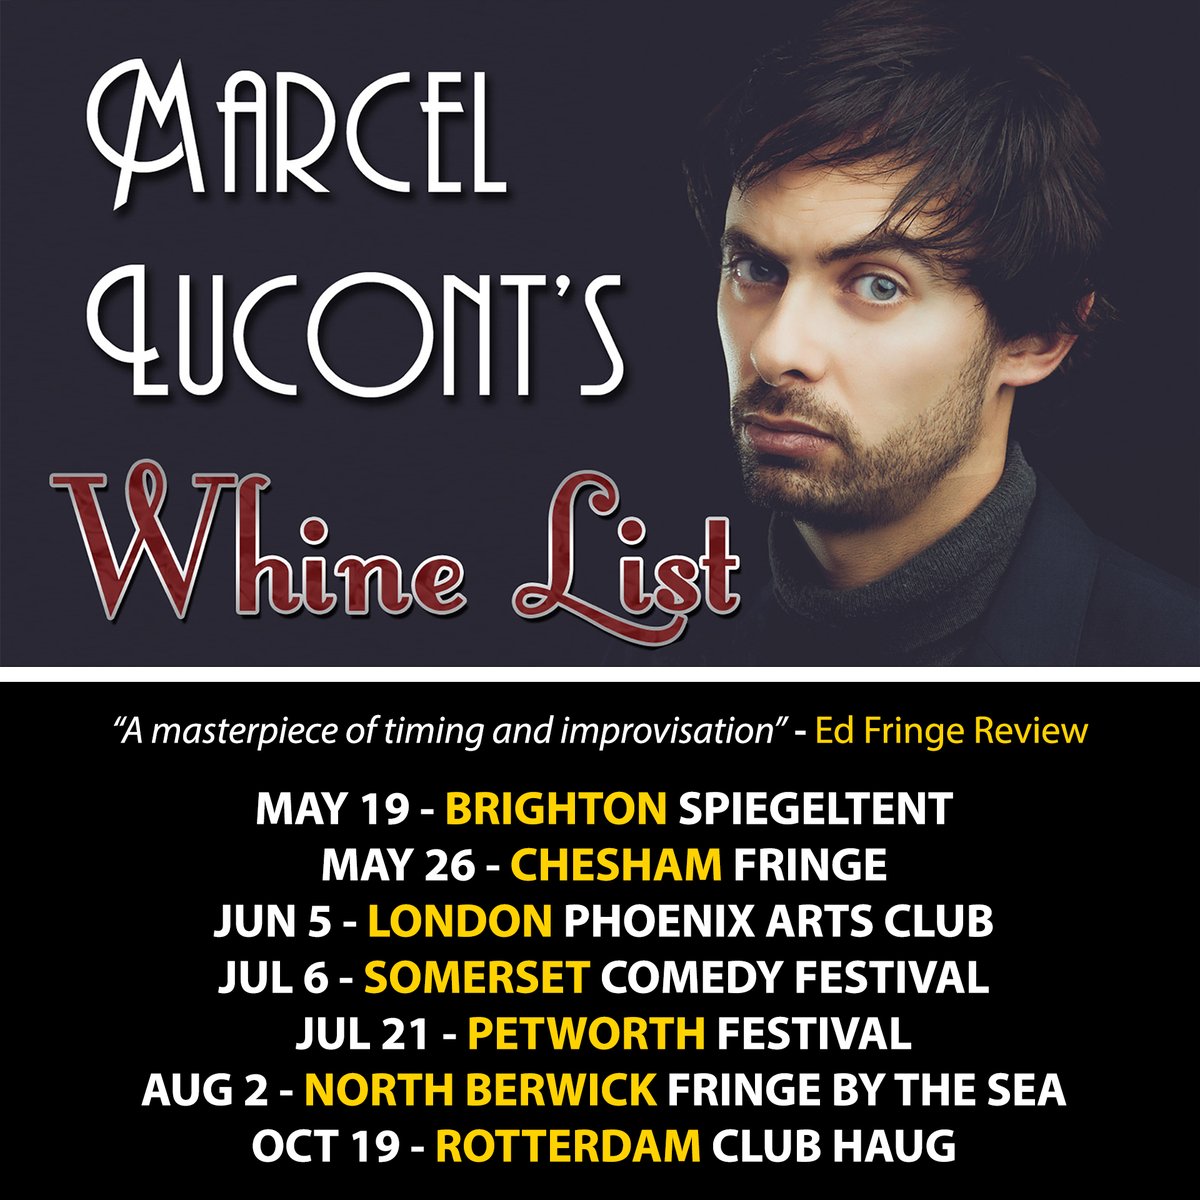 More exciting updates to come, including those US dates you cannot stop pestering me about. For now: May 19 @BSpiegeltent May 26 Chesham Fringe Jun 5 @phoenixartsclub Jul 6 @SomersetComFest Jul 21 @PetworthFest Aug 2 @fringebythesea2 Oct 19 @ClubHaug linktr.ee/marcellucont